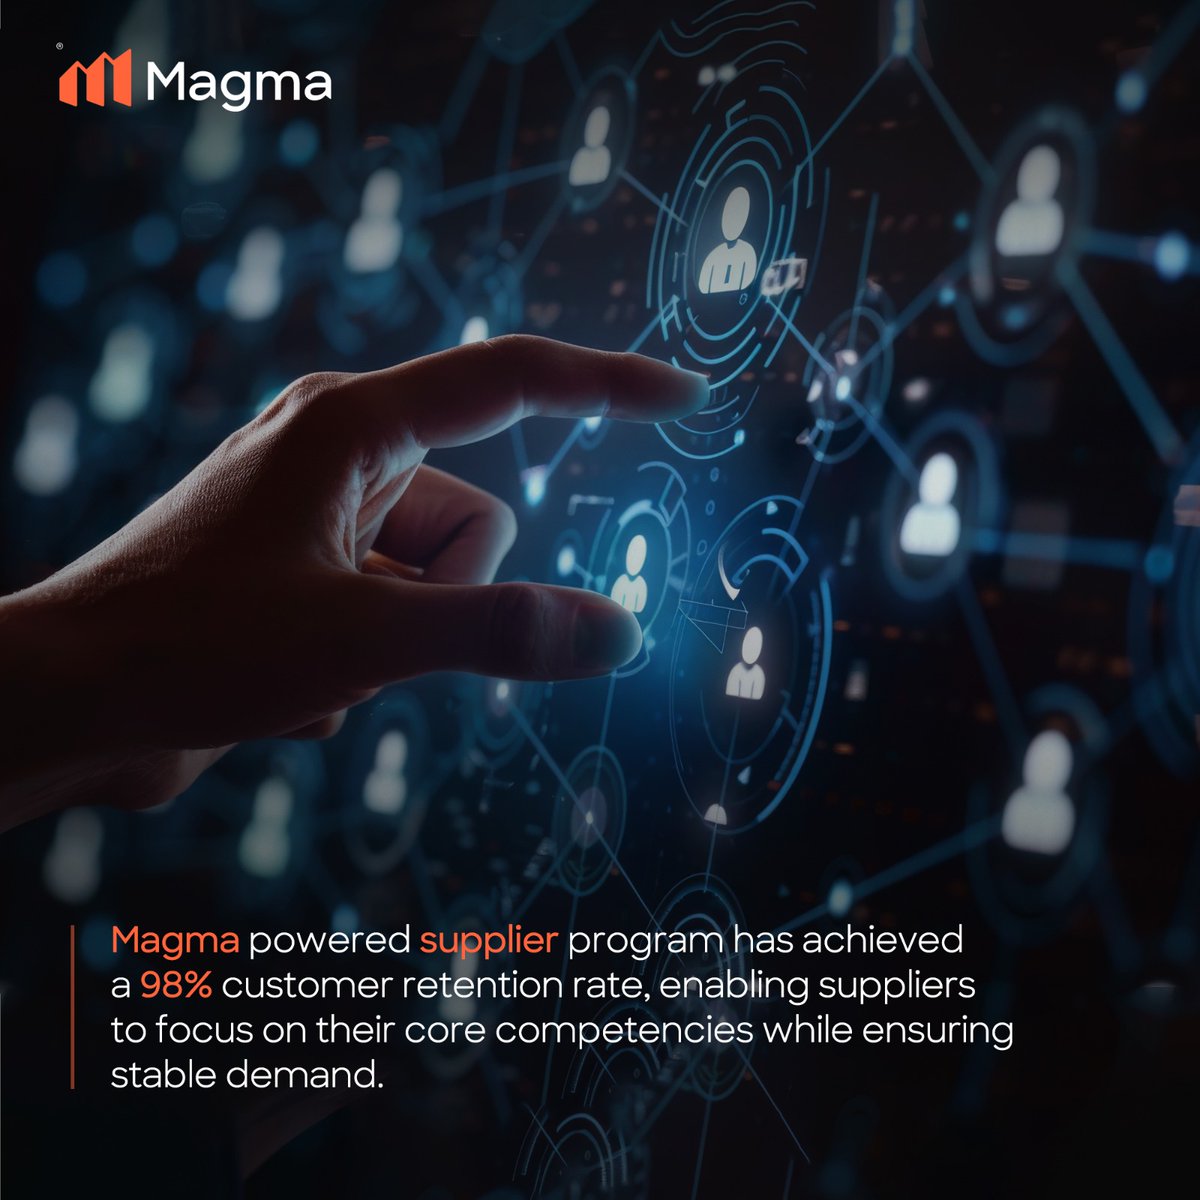 Keeping customers happy and loyal! Magma powered suppliers retain an impressive 98% of their customers, a testament to our commitment to excellence.
#RiseWithMagma #B2B #marketplace #manufacturing #supplychain #rawmaterial #startups #growth #TechInnovations #MagmaGroup